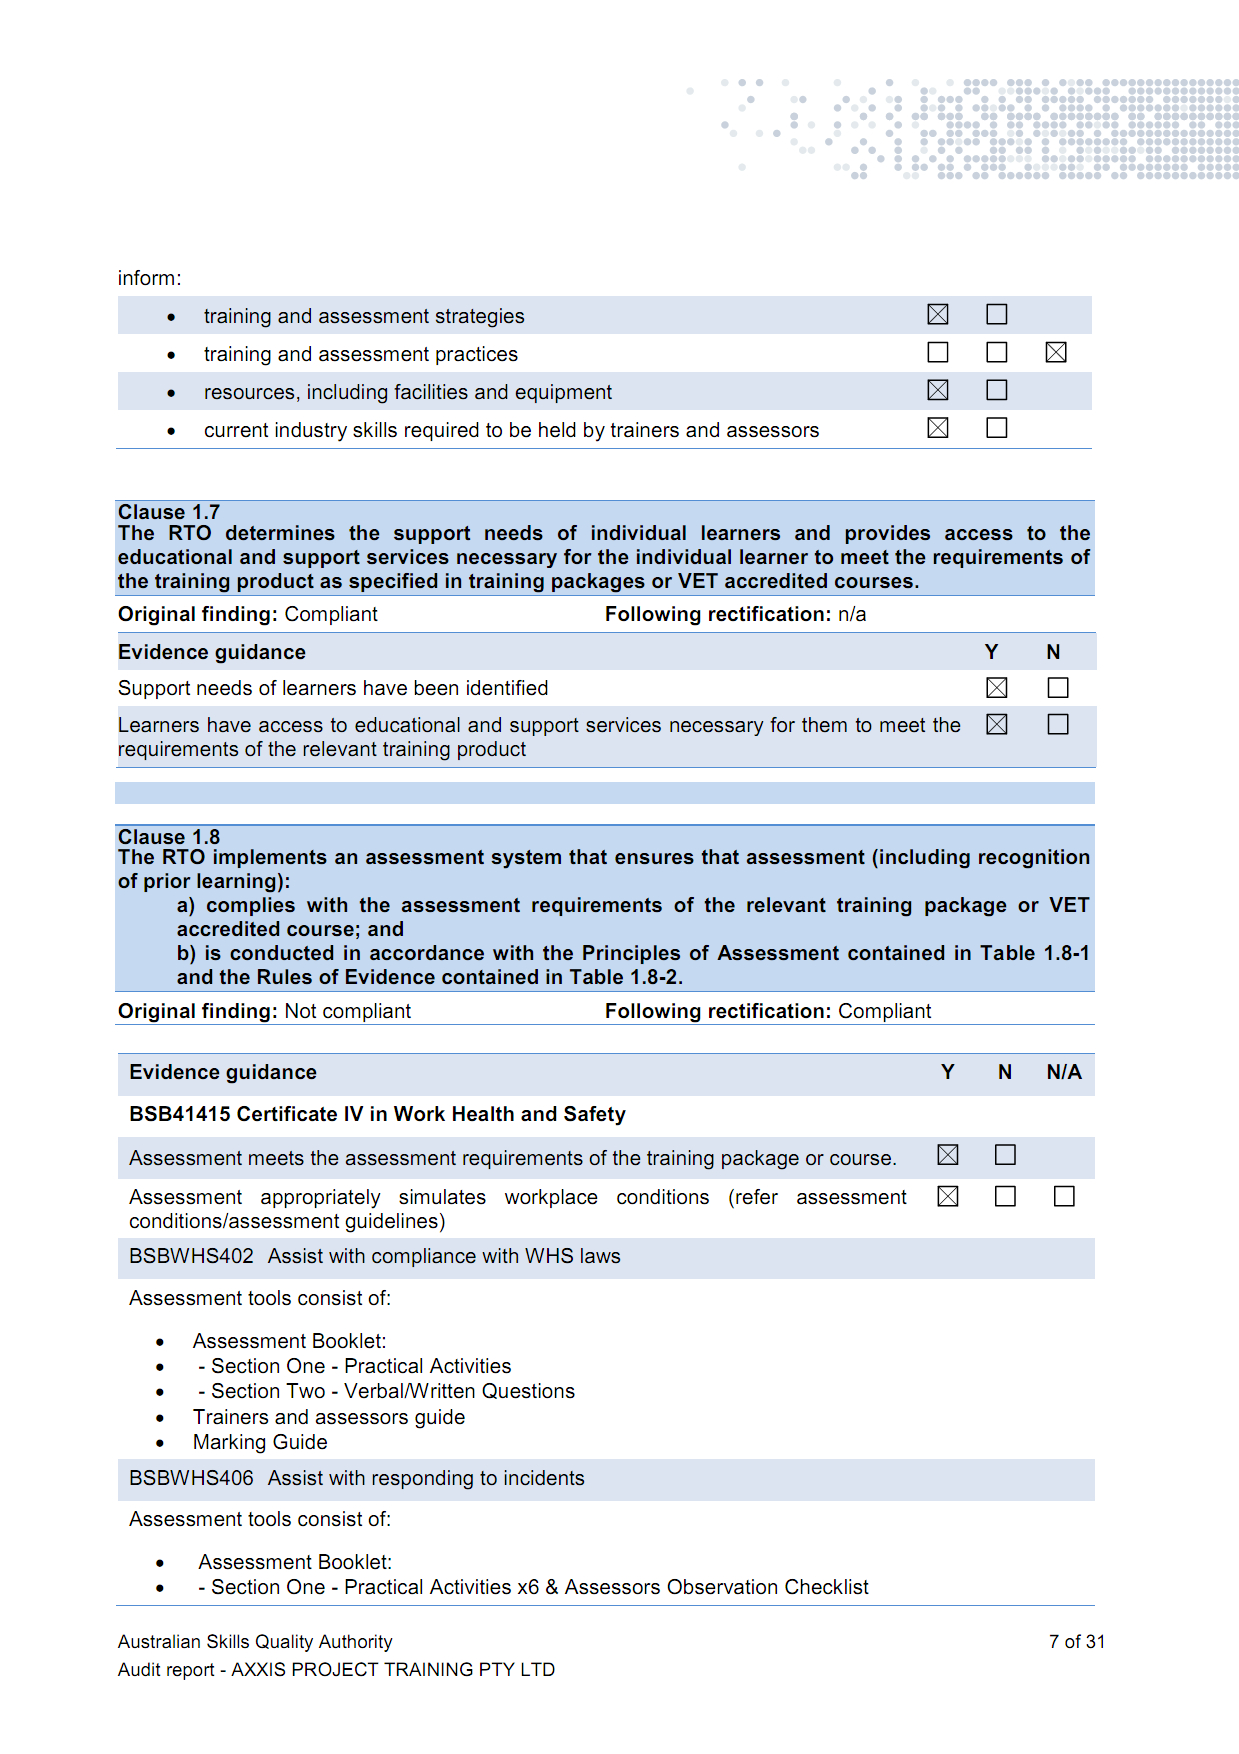 Incident Report Form Template Qld ] – Michael Smith News 17 In Incident Report Form Template Qld